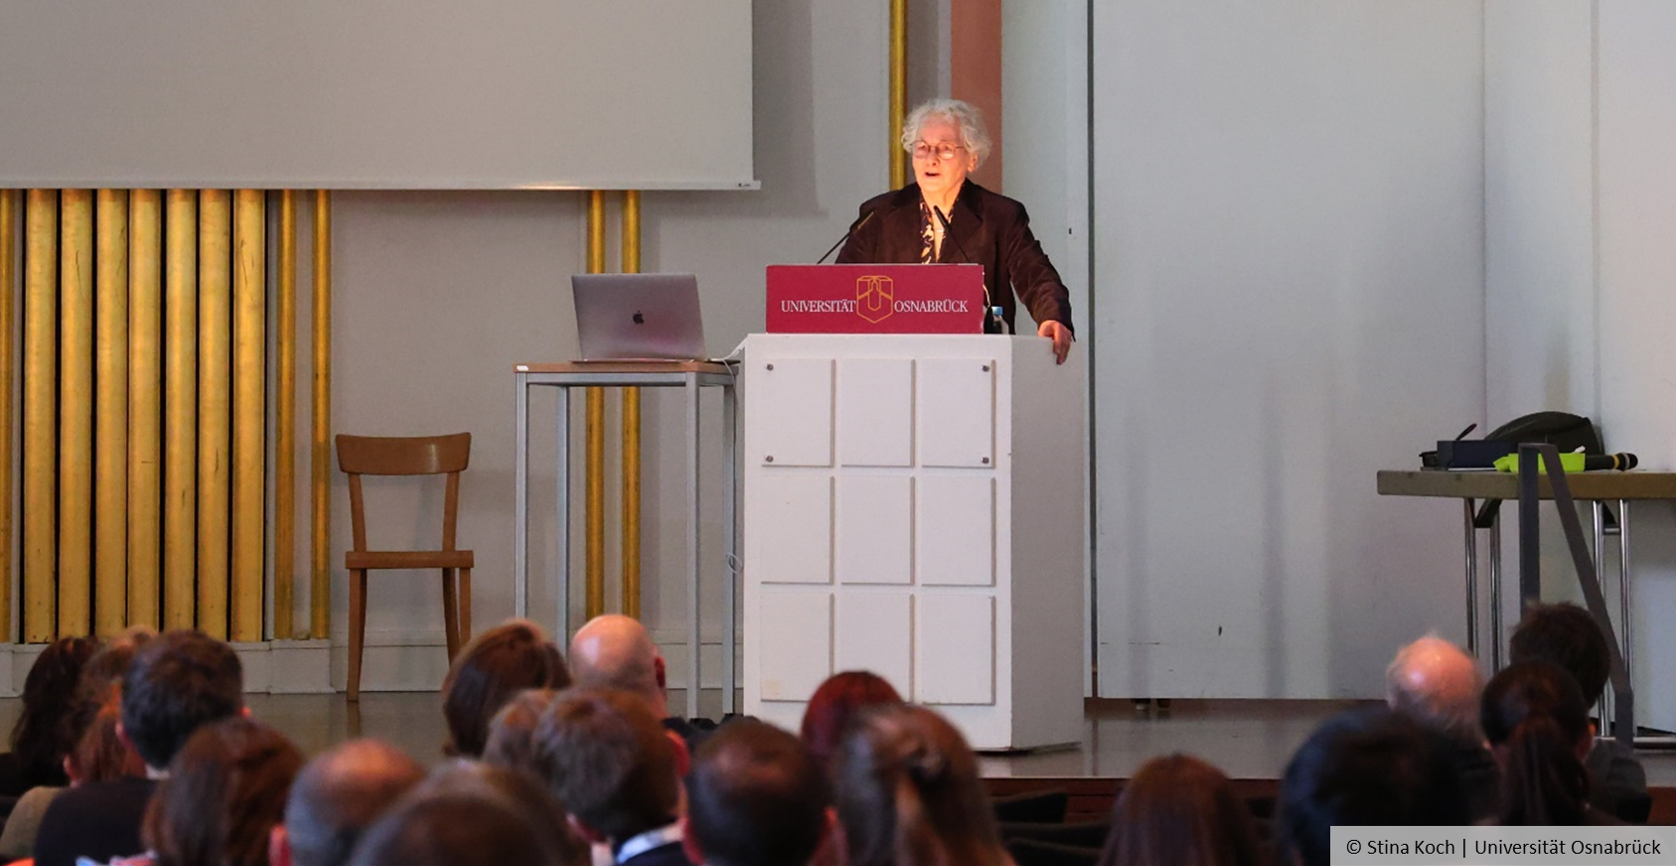 Prof. Dr. Nüsslein-Volhard stands at a lectern and speaks, in the foreground you can see part of her audience from behind.